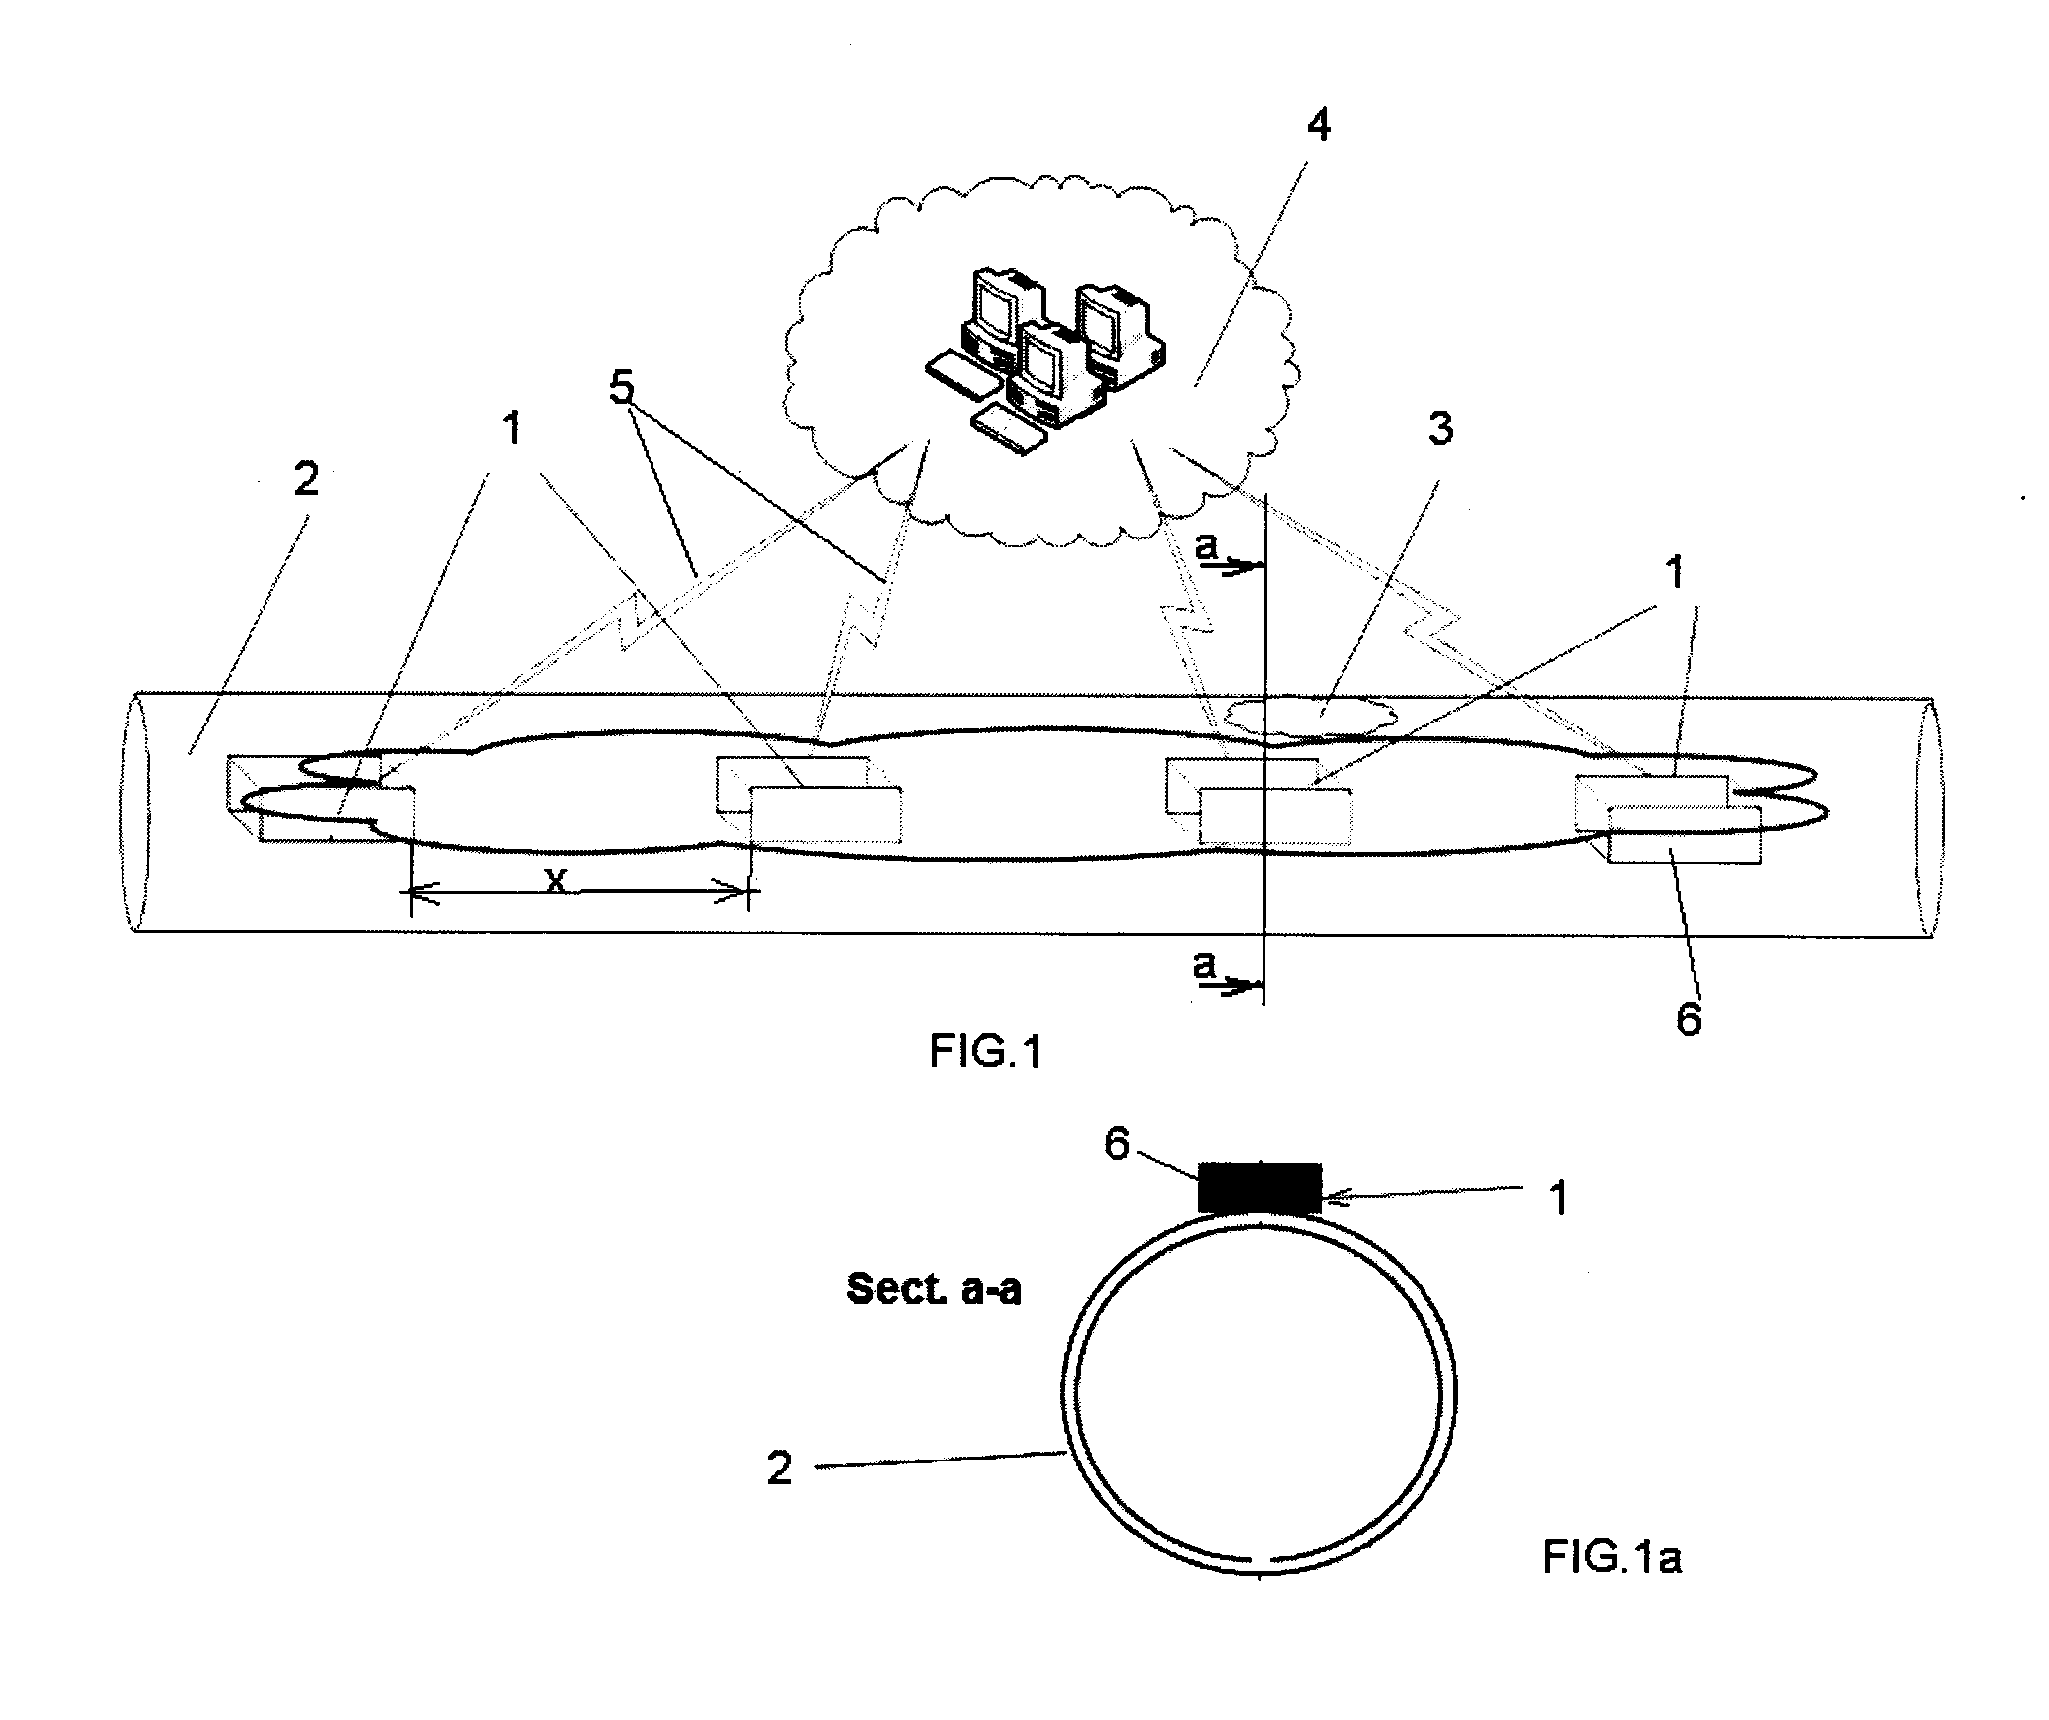 System and method for supervising, managing, and monitoring the structural integrity of a fluid-transportation pipeline network, for locating the leaking point, and for evaluating the extent of the failure